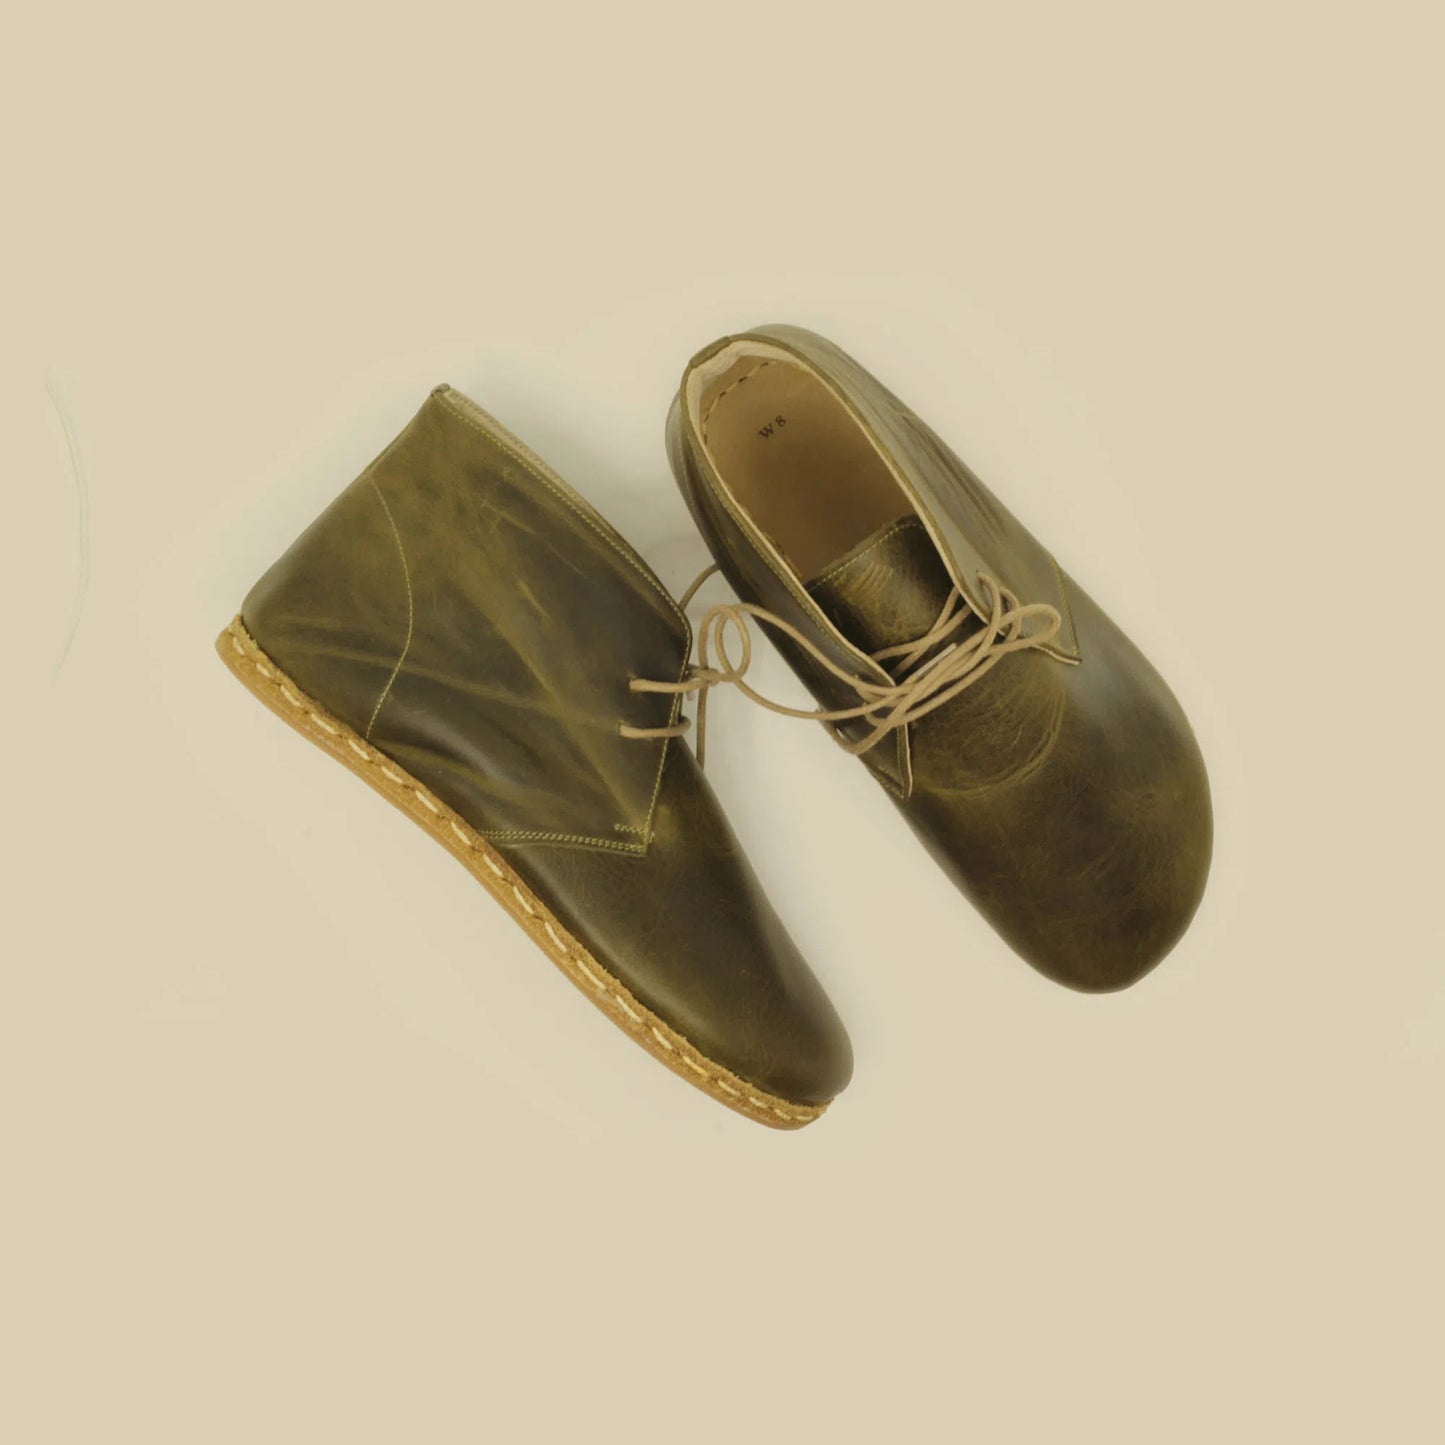 Olive Green Oxford Boots Women's-Women's Boots-nefesshoes-3-Nefes Shoes